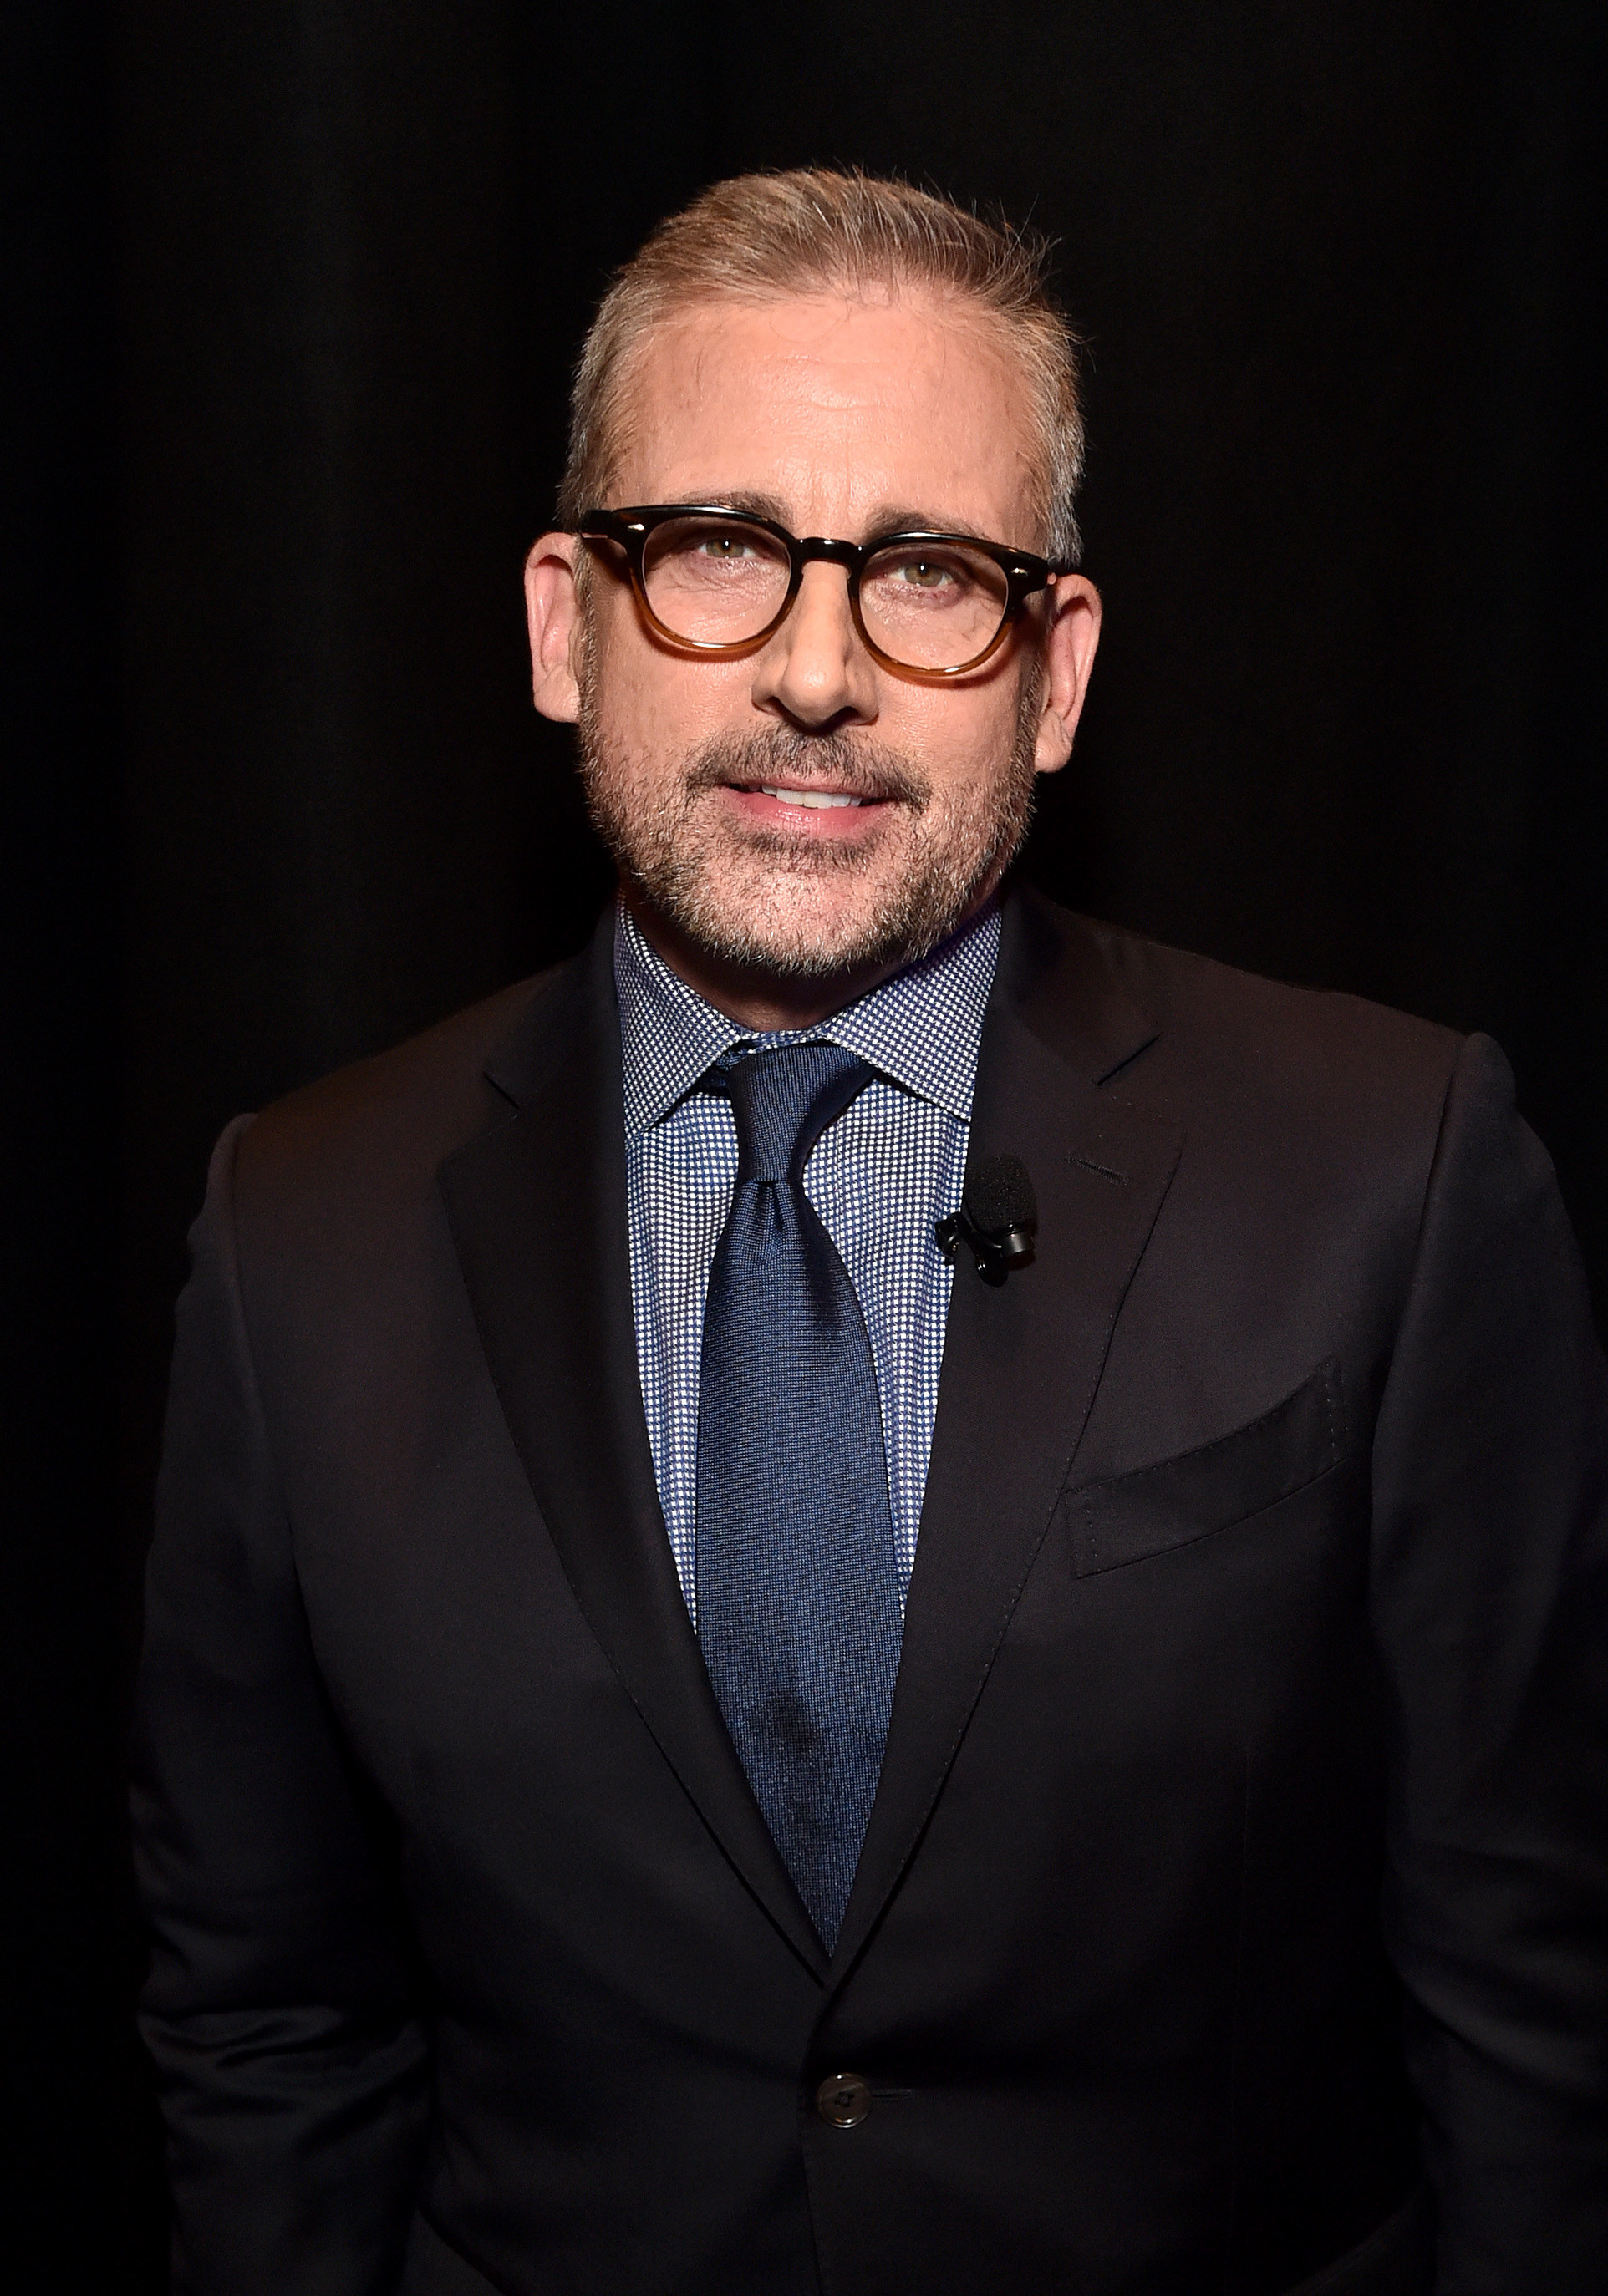 Steve Carell at an event, wearing a black suit